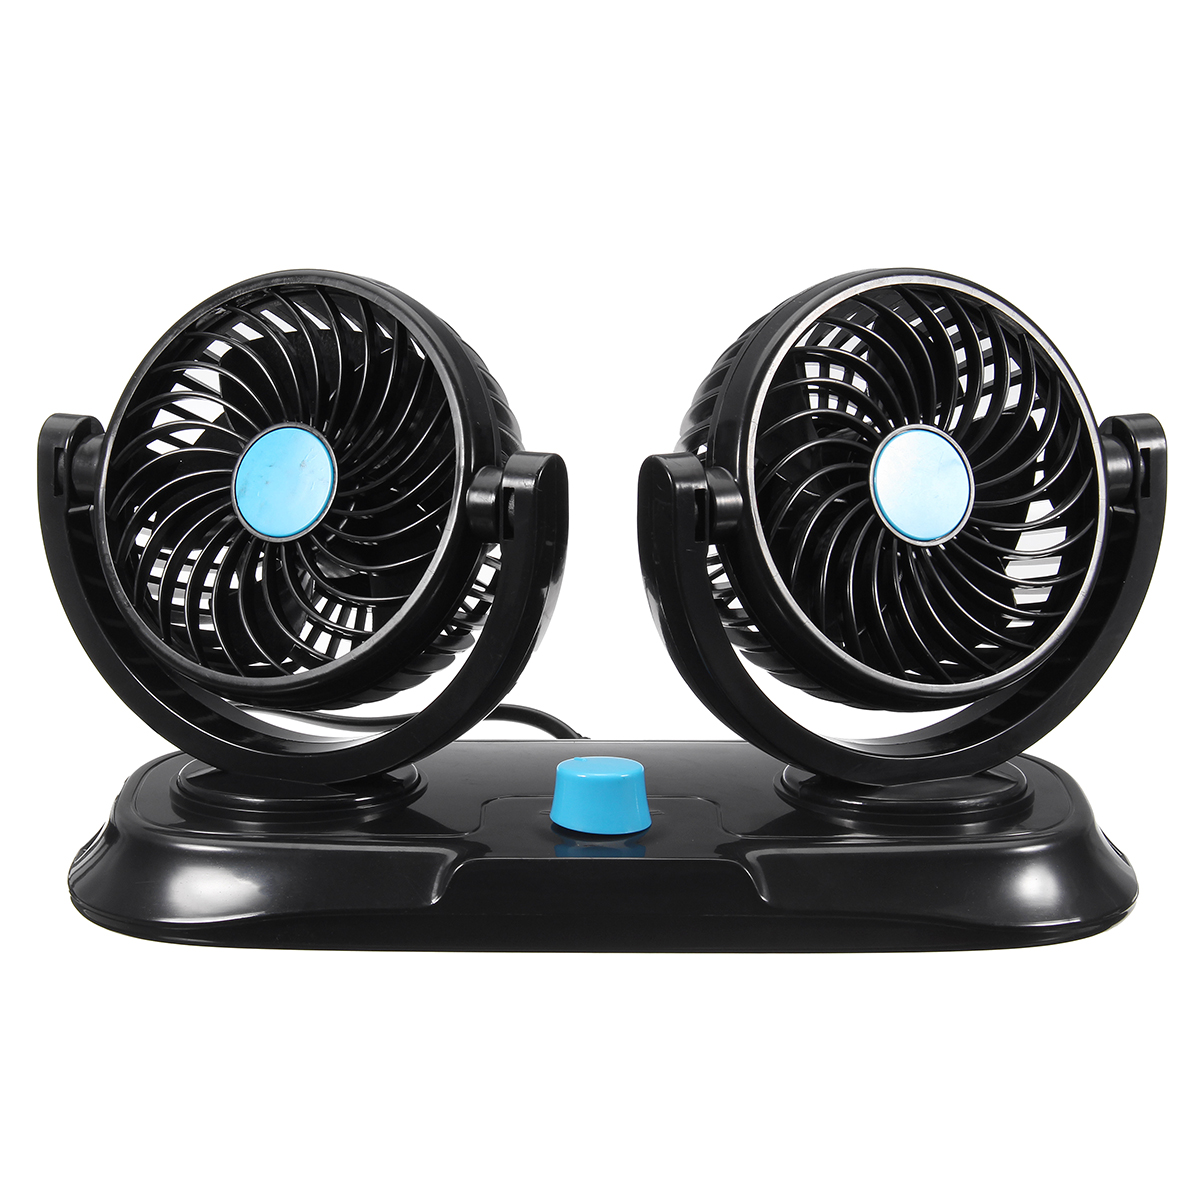 12V-Adjustable-Double-360-Degrees-Mini-Oscillating-Fan-Rotation-Cooling-Fan-Air-Conditioner-1338437-3